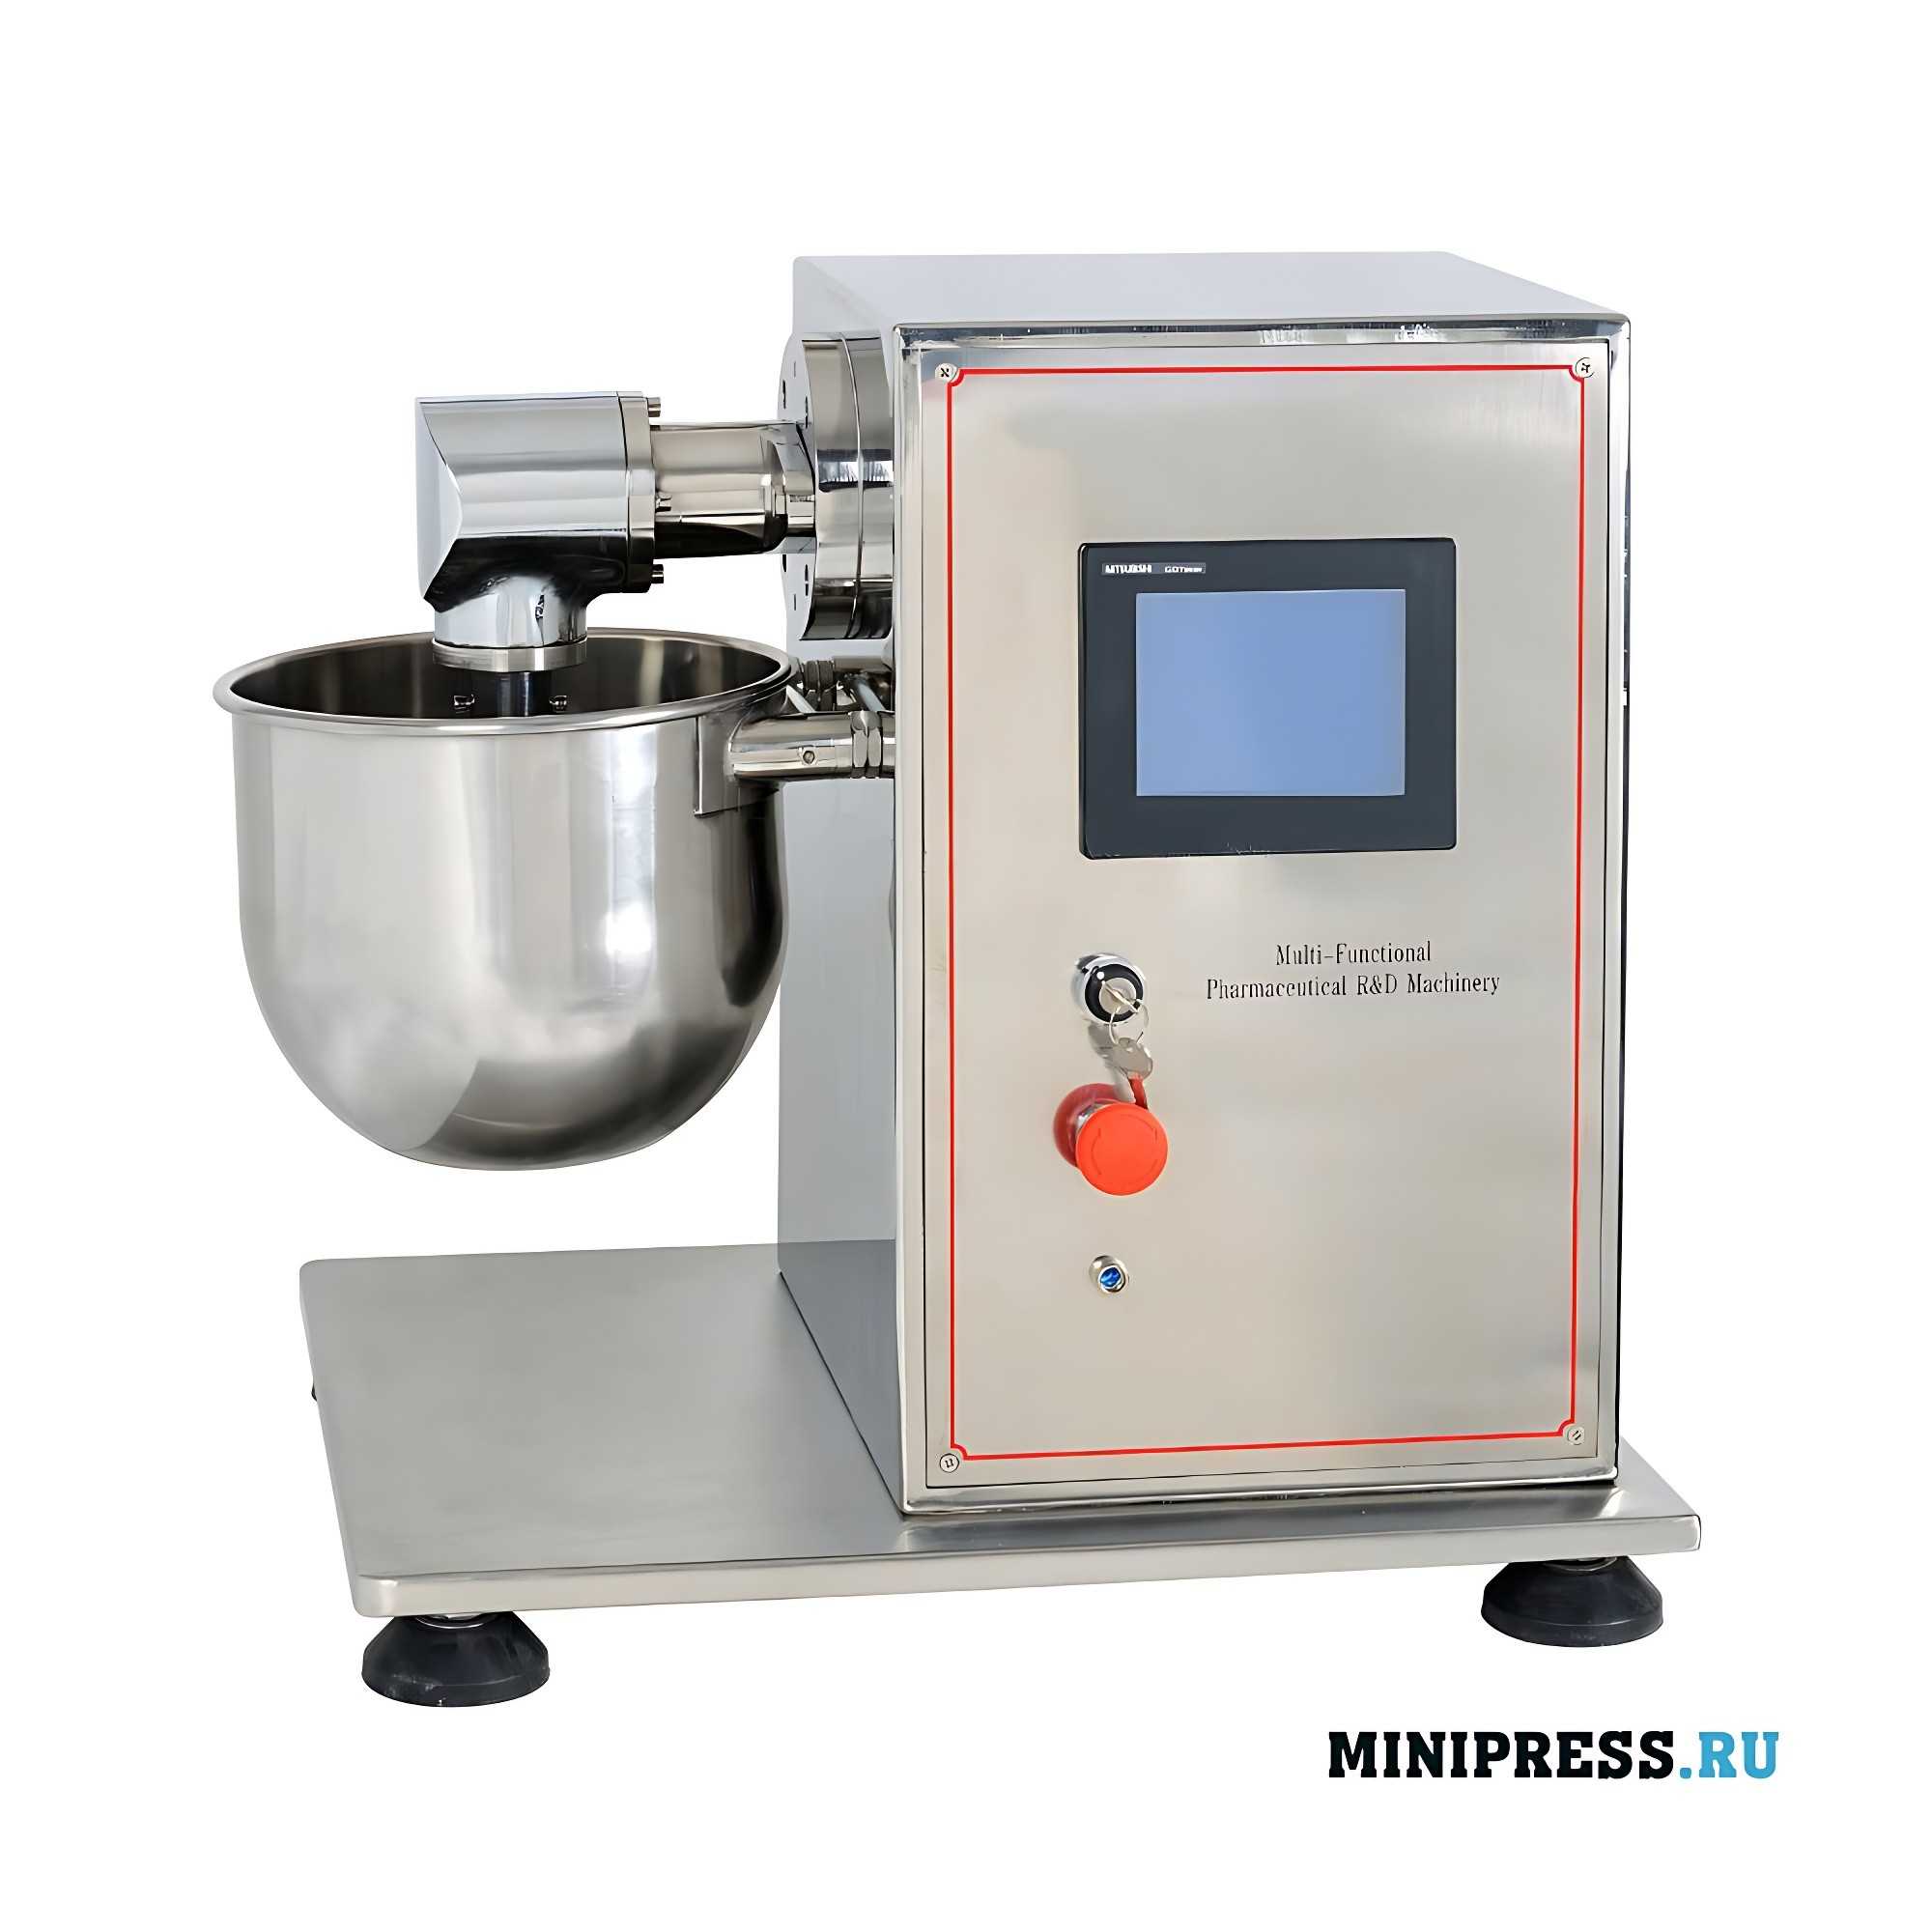 Multifunctional Experimental Pharmaceutical Equipment and Paddle Mixer UNIV 2